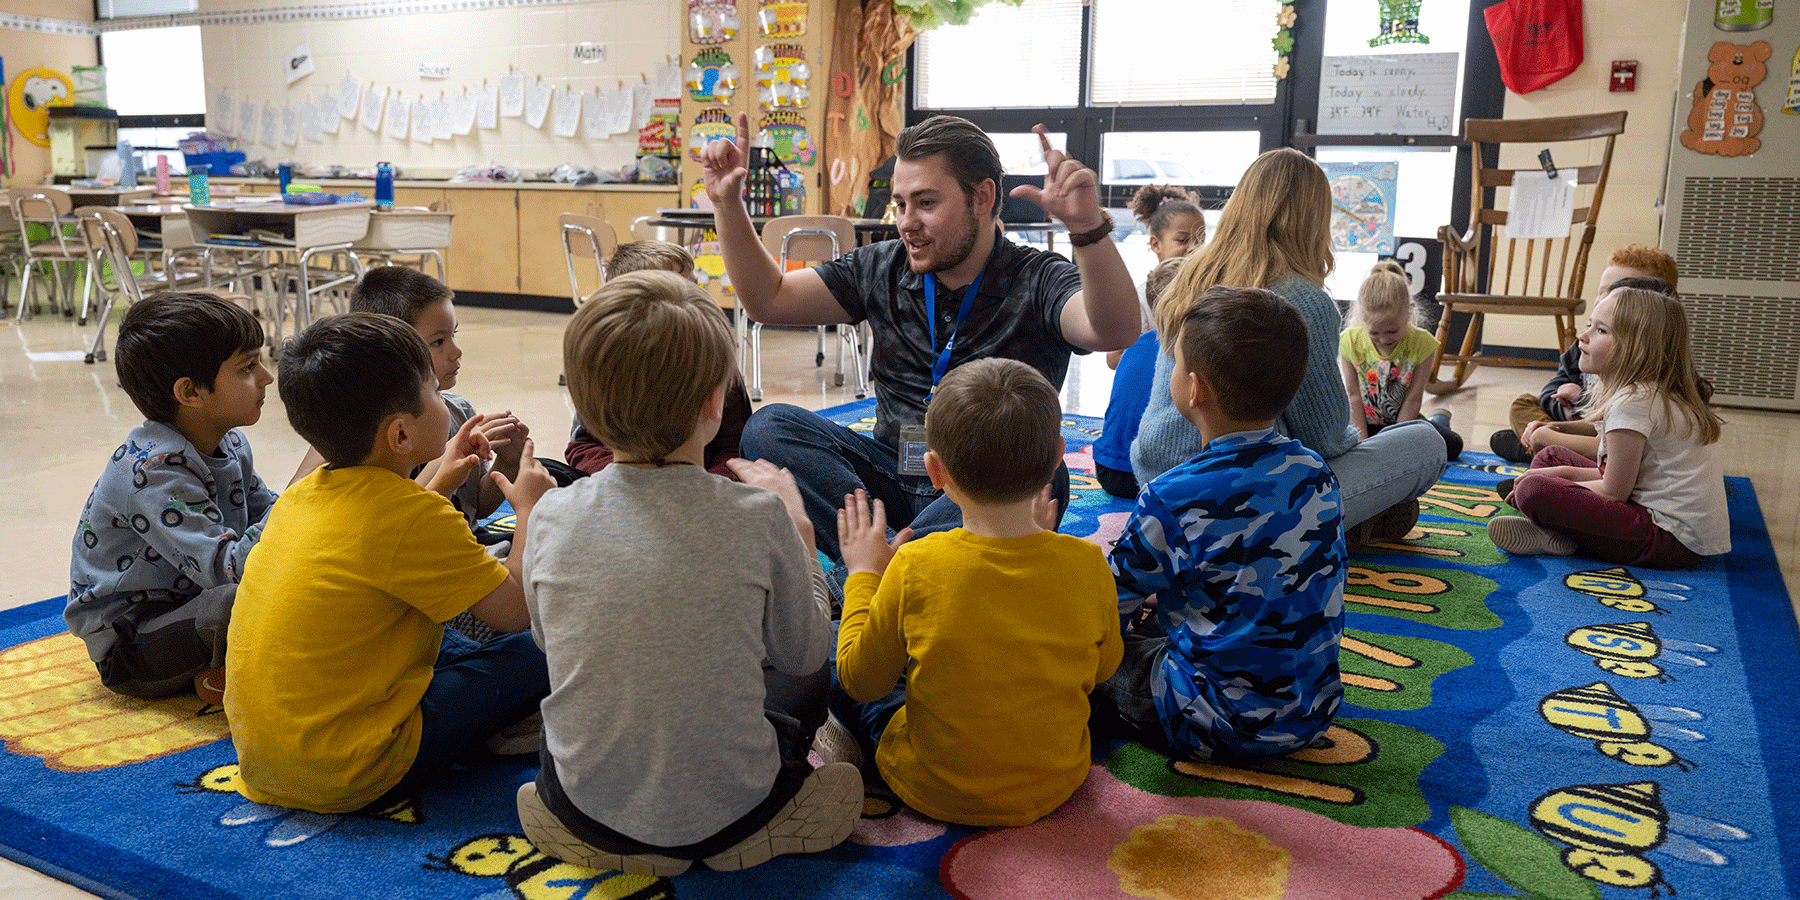 A classroom with 13 young children of mixed races, wearing a variety of yellow, blue, and grey clothing. The children are divided into two groups, sitting in circles on a blue, green, and yellow-colored floor rug. In the left group, a white male sits with the students. He has short brown hair with a matching beard. He wears a black T-shirt and blue jeans. He is holding up both hands as he looks at the students. In the right group, a white female sits with the students.